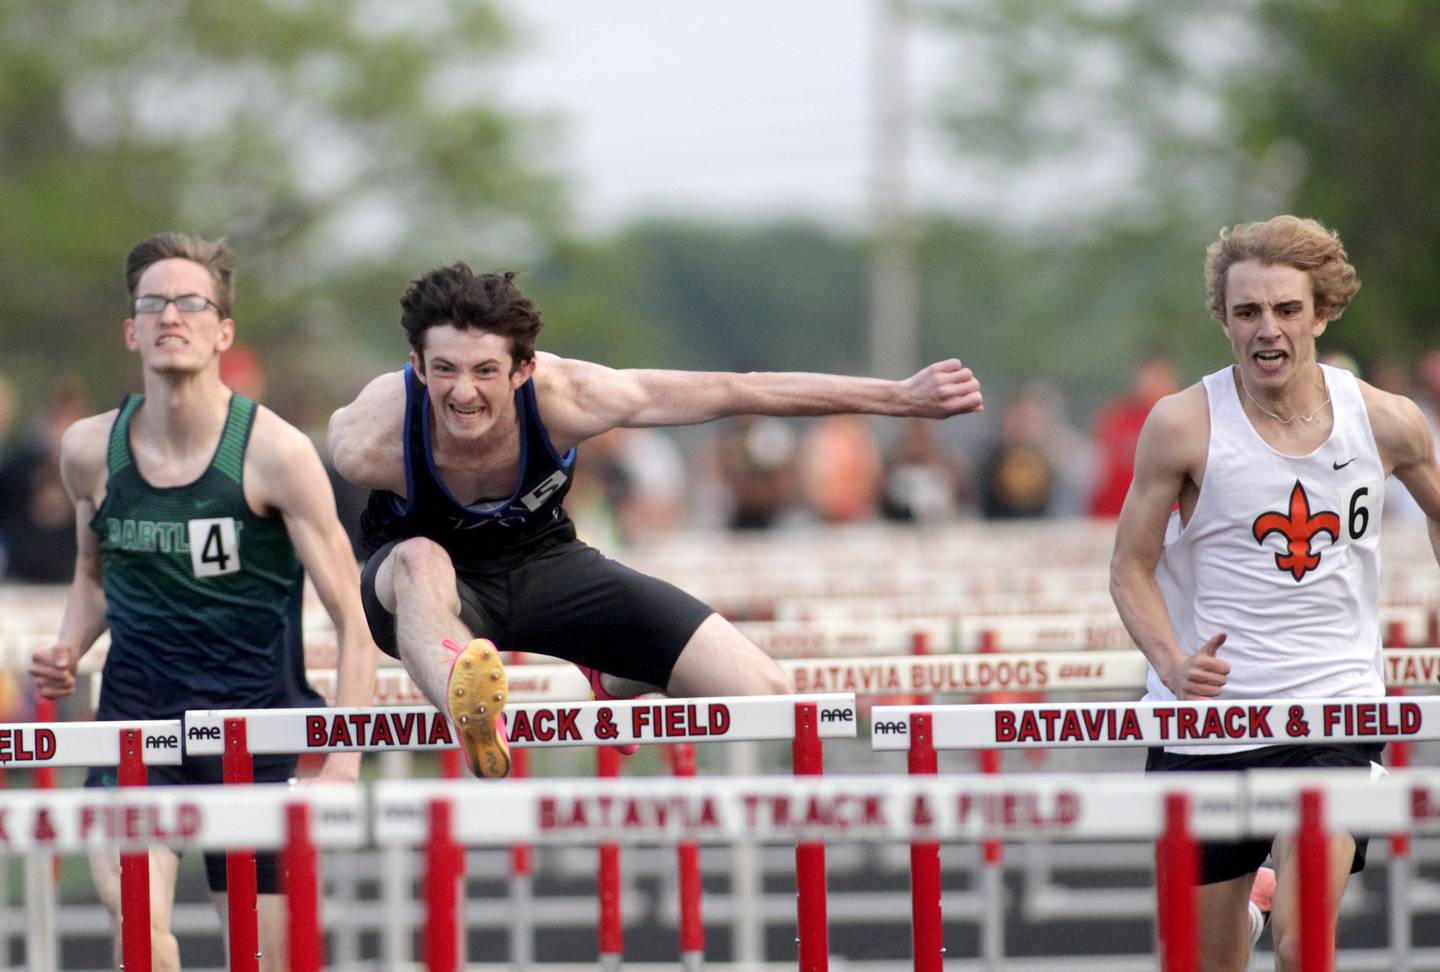 St. Charles North’s Bryce Thomas (center) flies over the hurdle in the 110-meter hurdles during the Class 3A Batavia track and field sectional on Thursday, May 18, 2023.